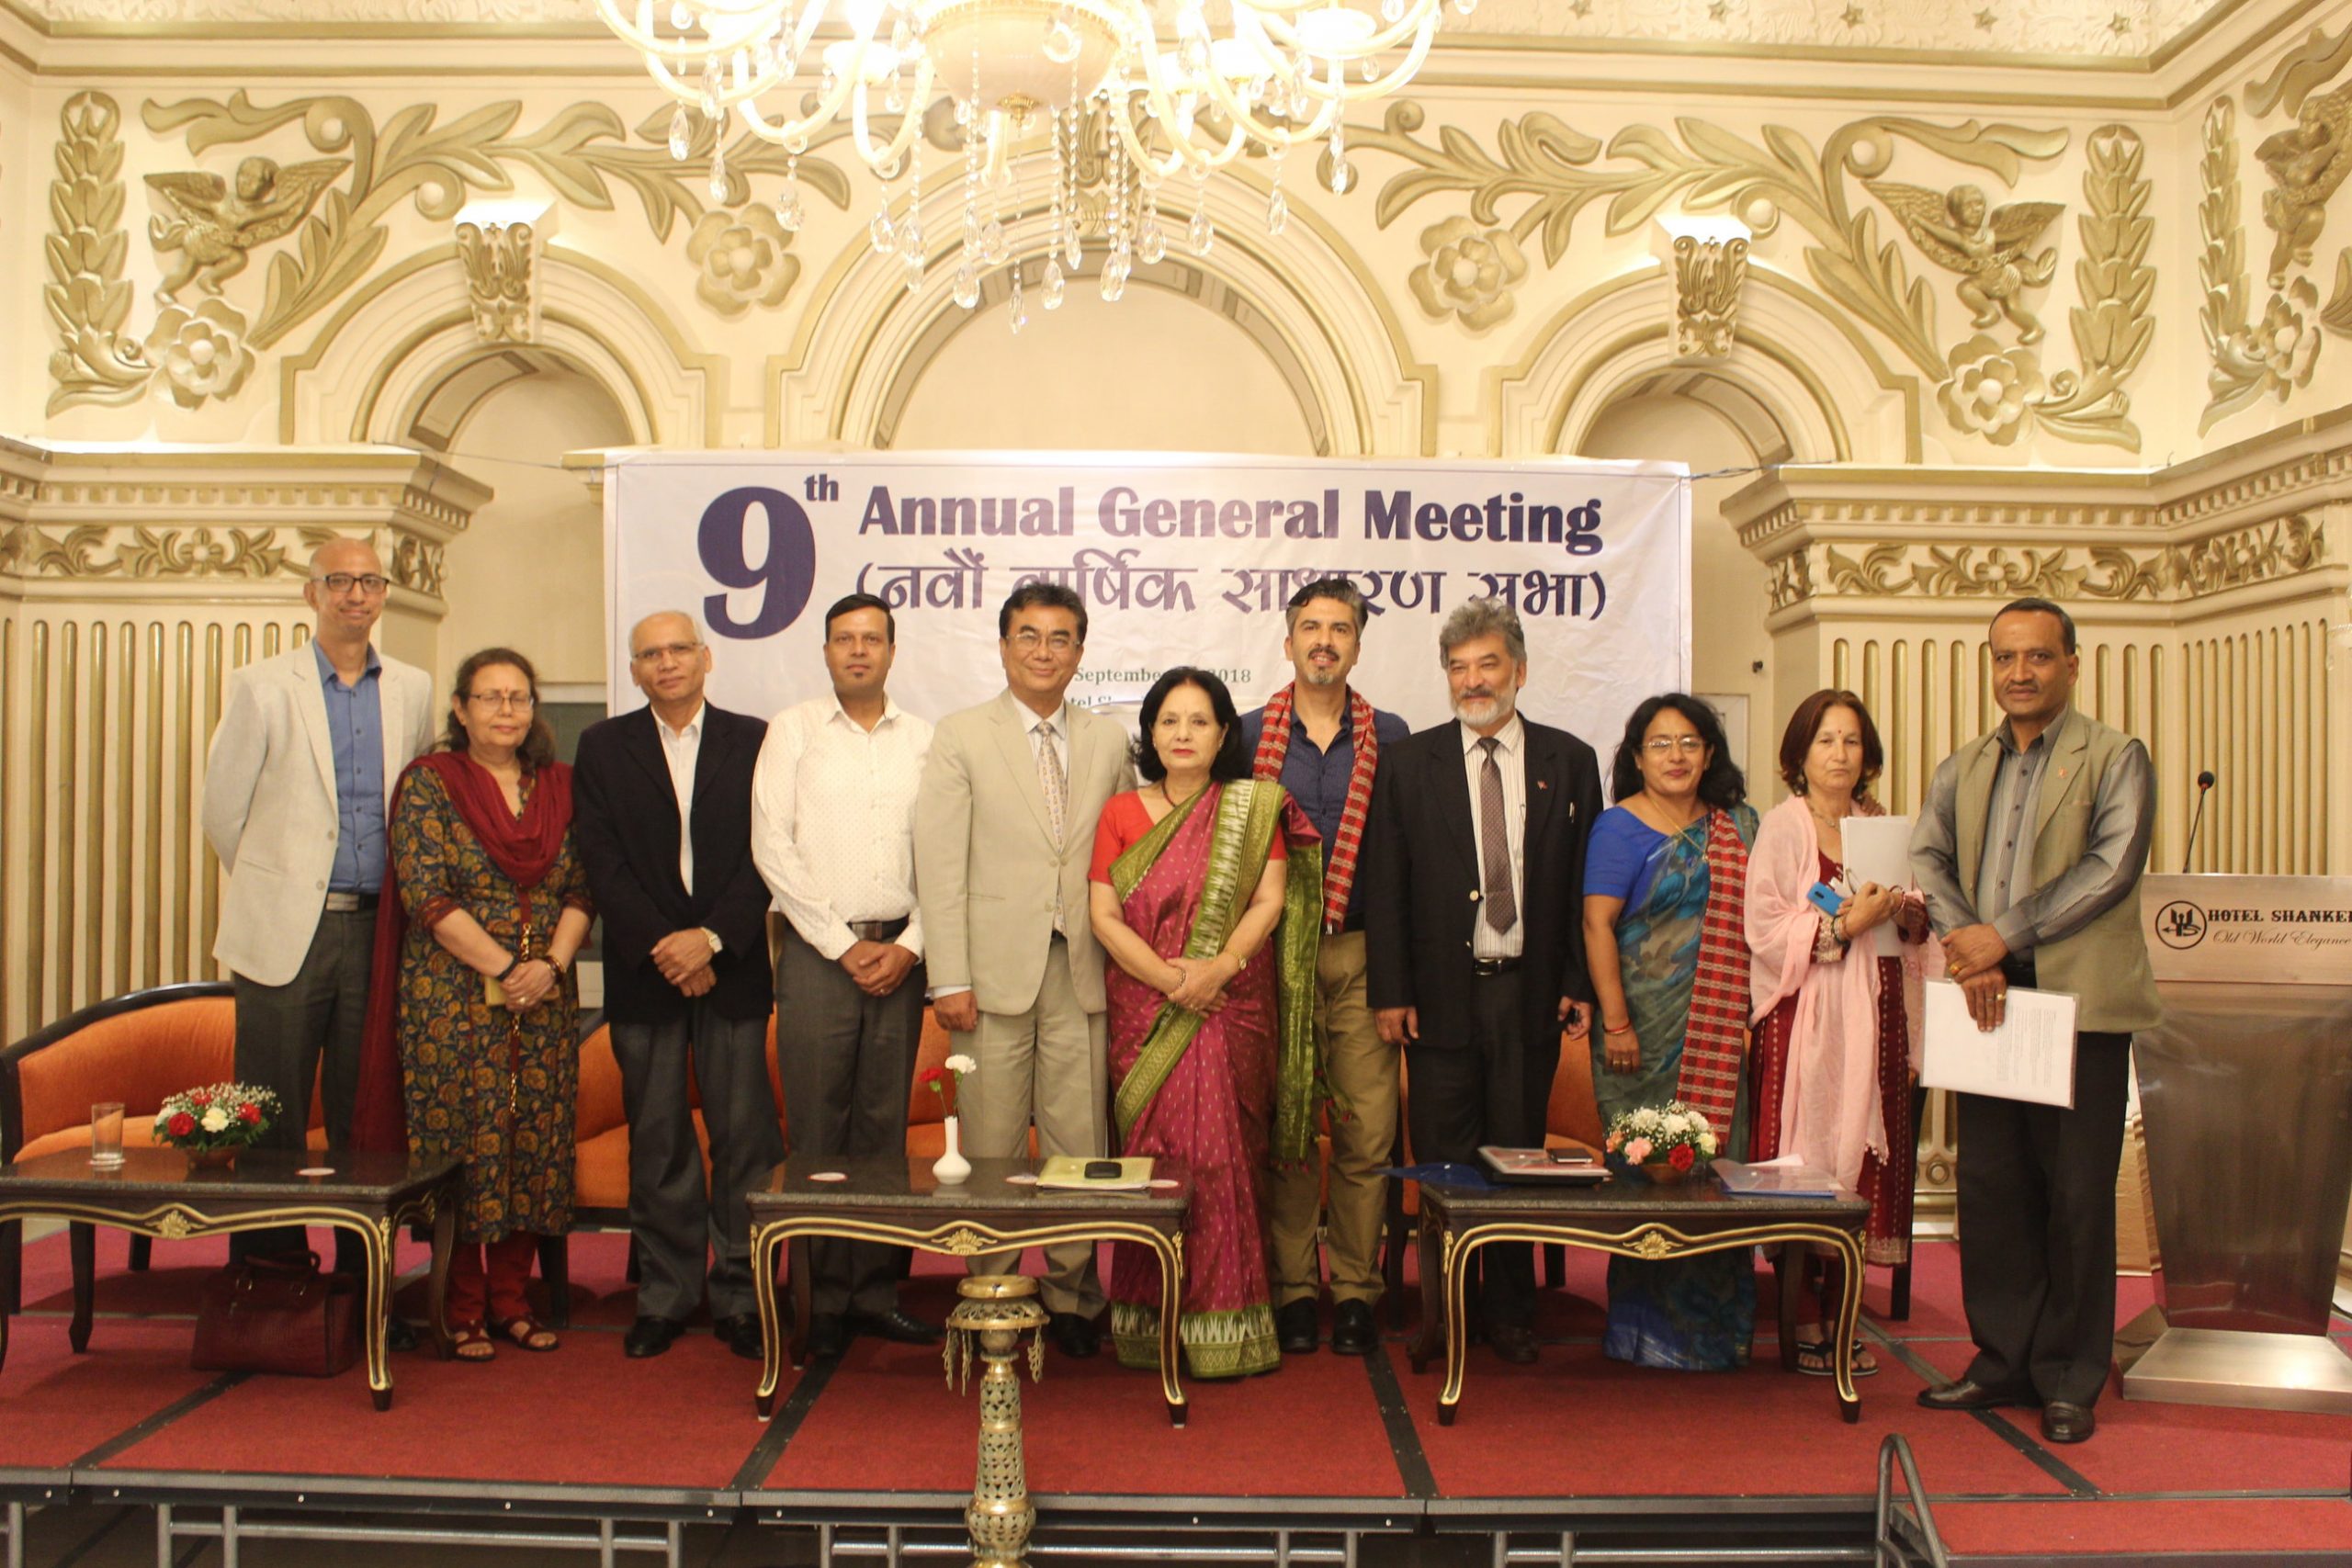 NPHF 9th Annual General Meeting was successfully conducted on September 07, 2018